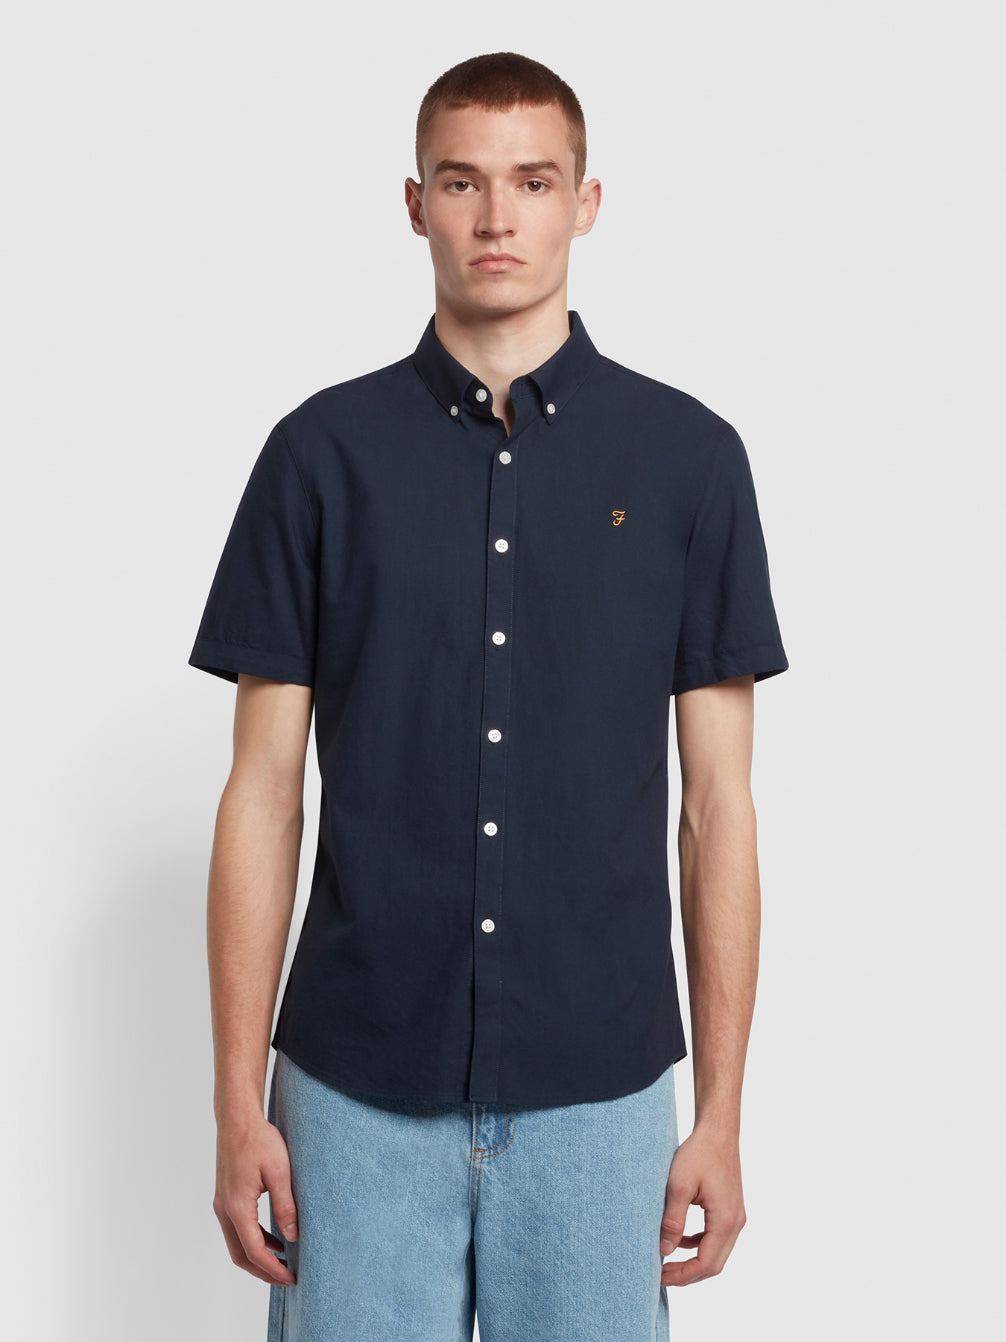 View Brewer Short Sleeve Oxford Shirt In Navy information